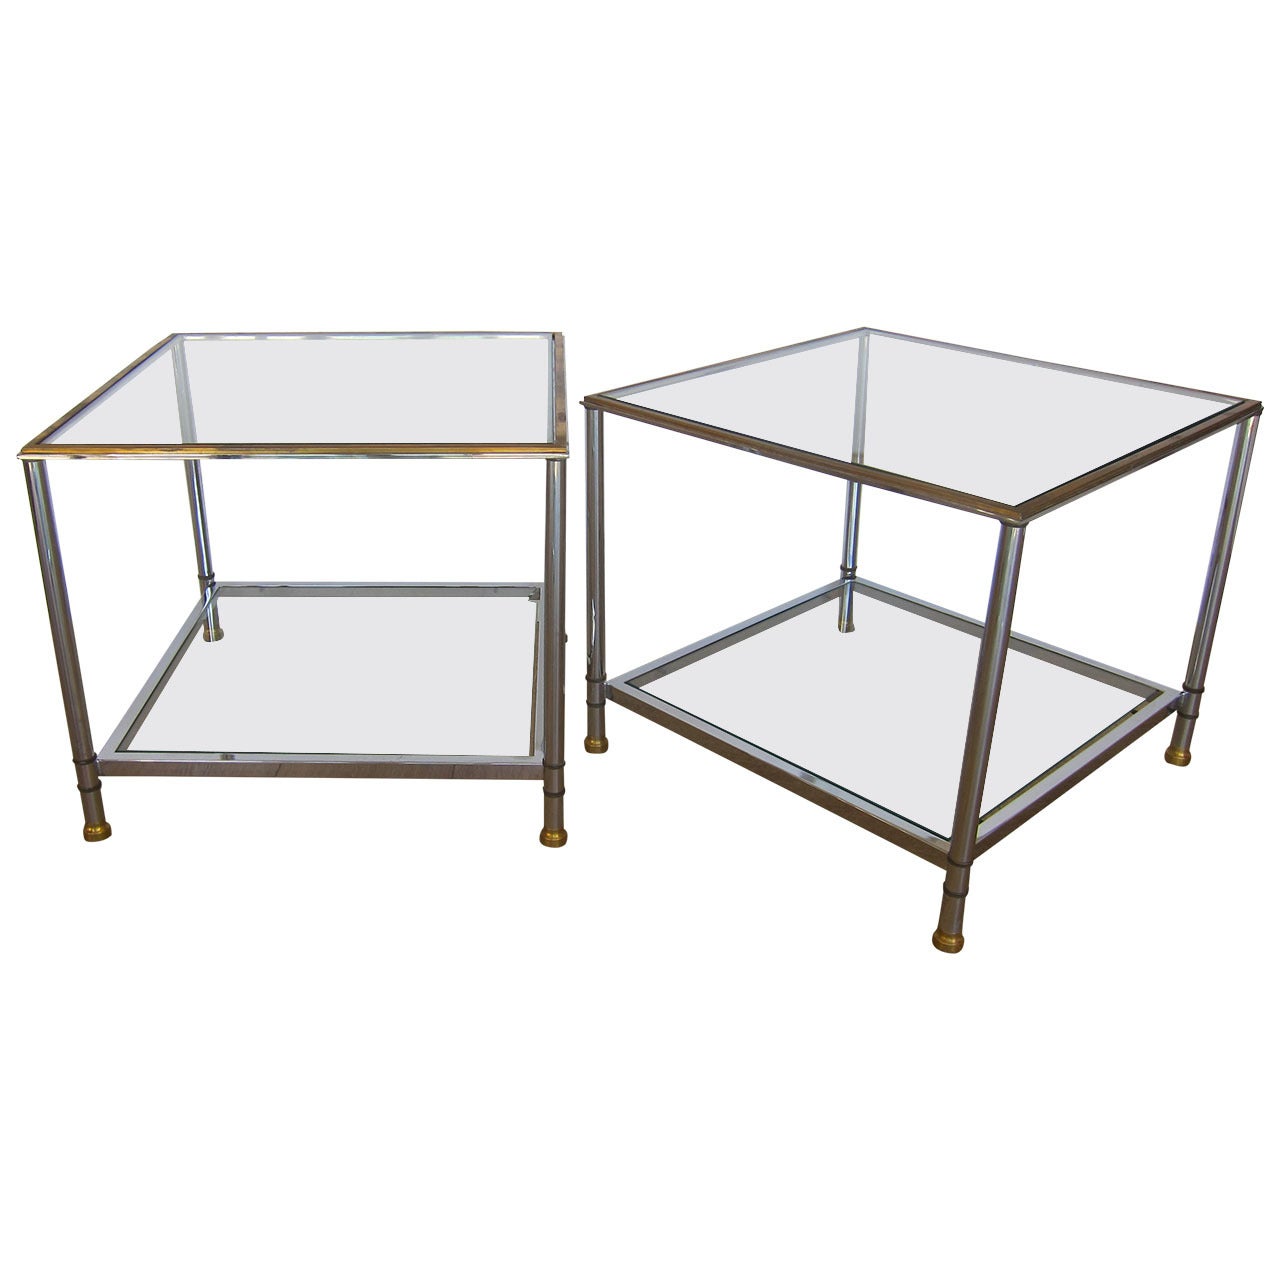 Pair of Two Tiers End Tables, USA, 1970s